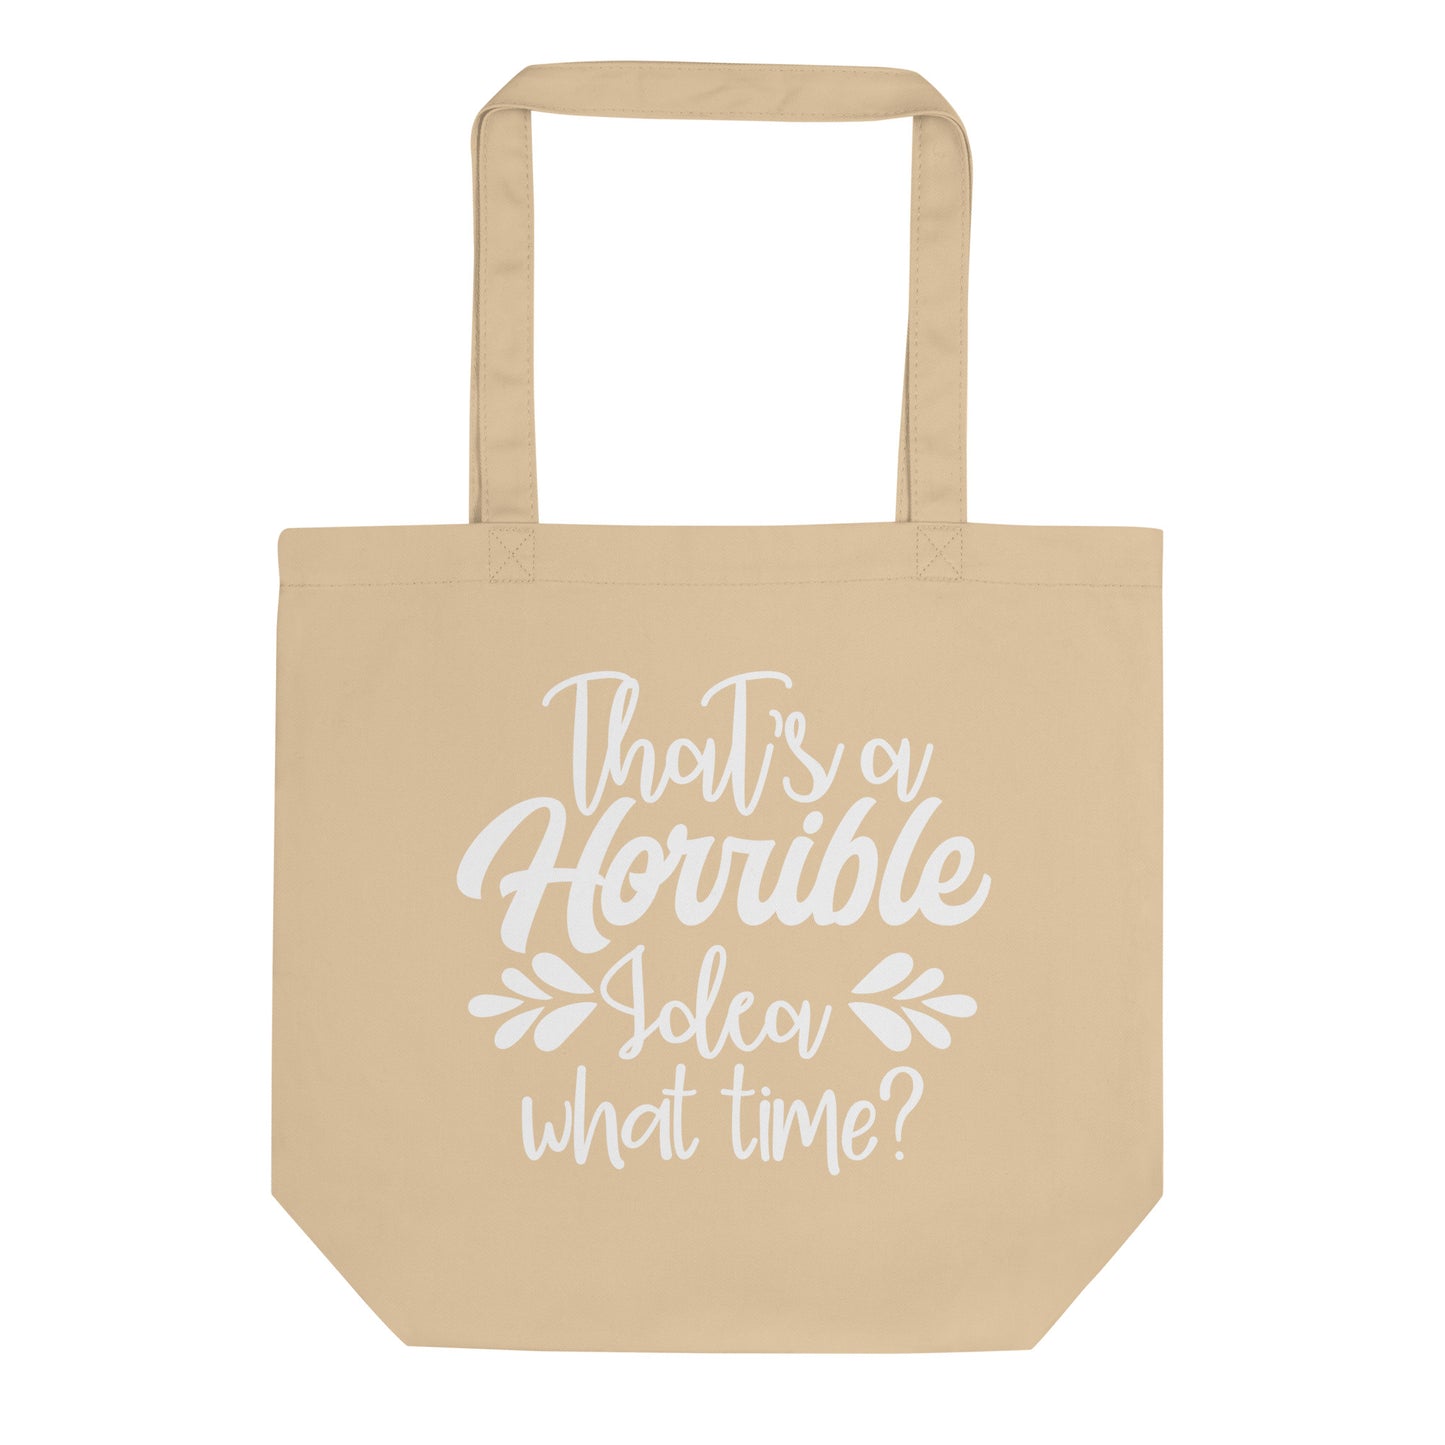 That a Horrible Idea What Time? Eco Tote Bag